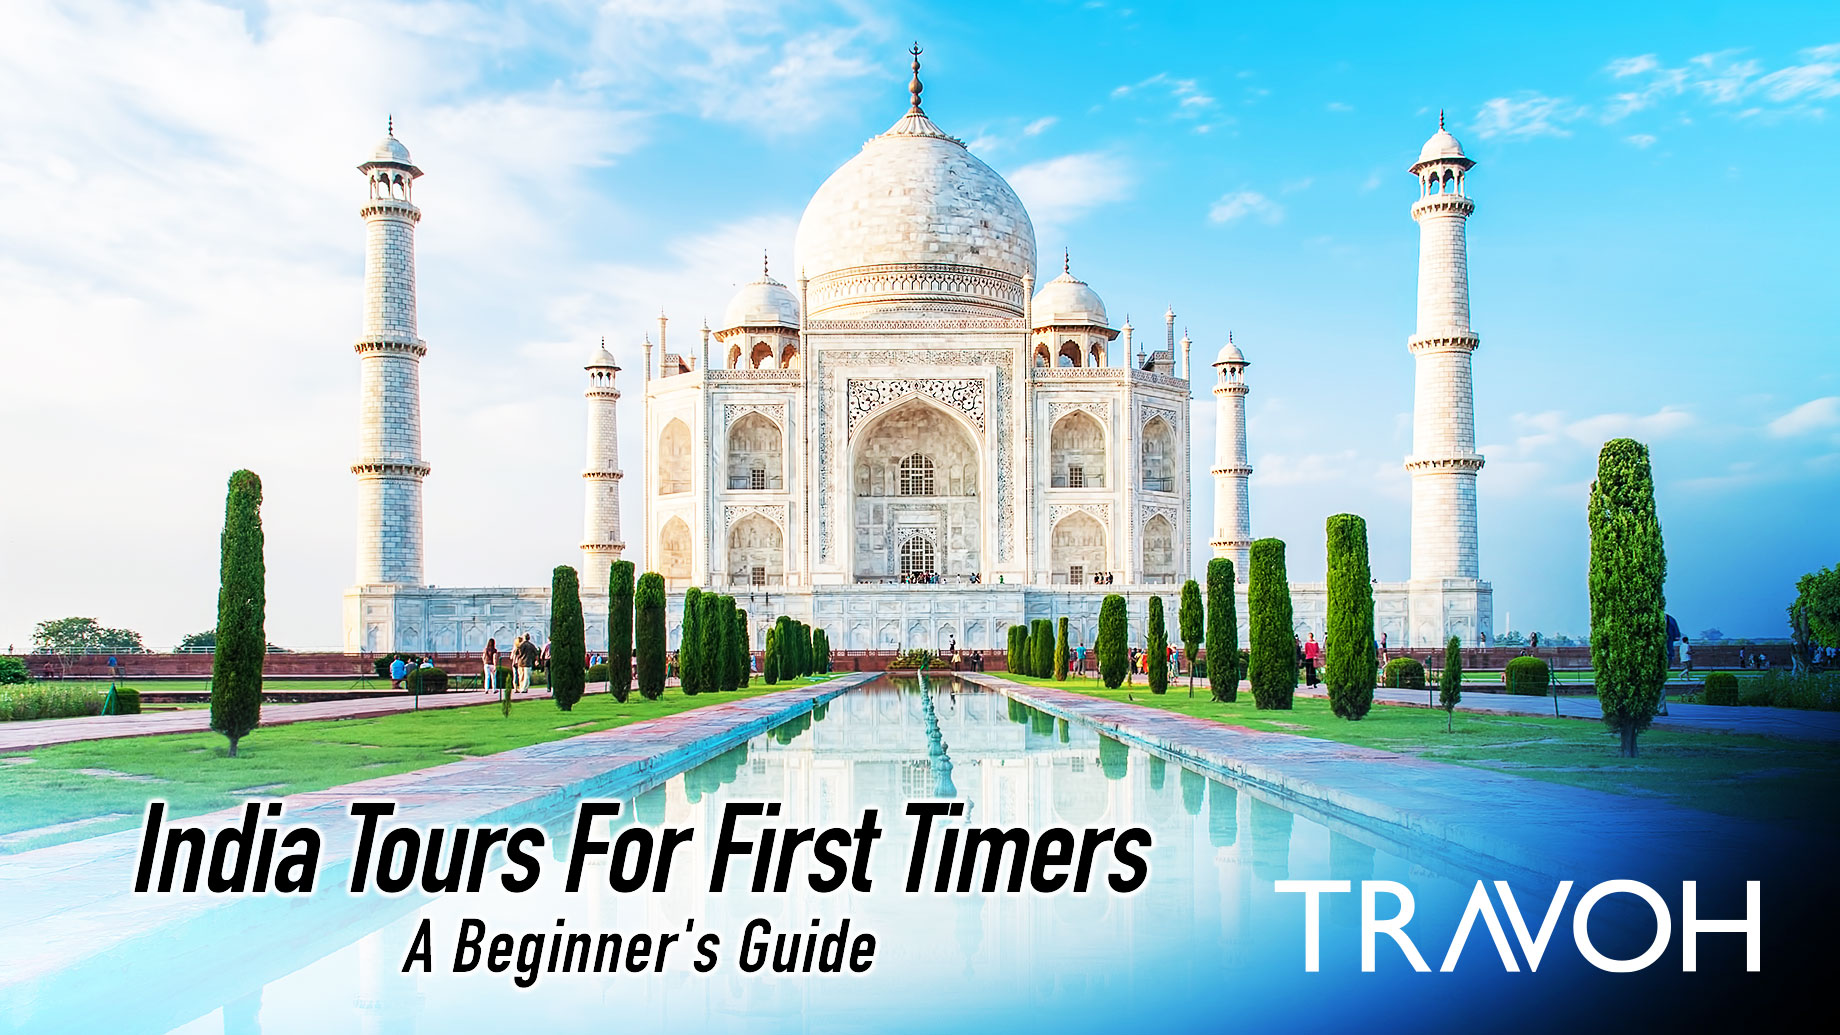 India Tours For First Timers: A Beginner's Guide